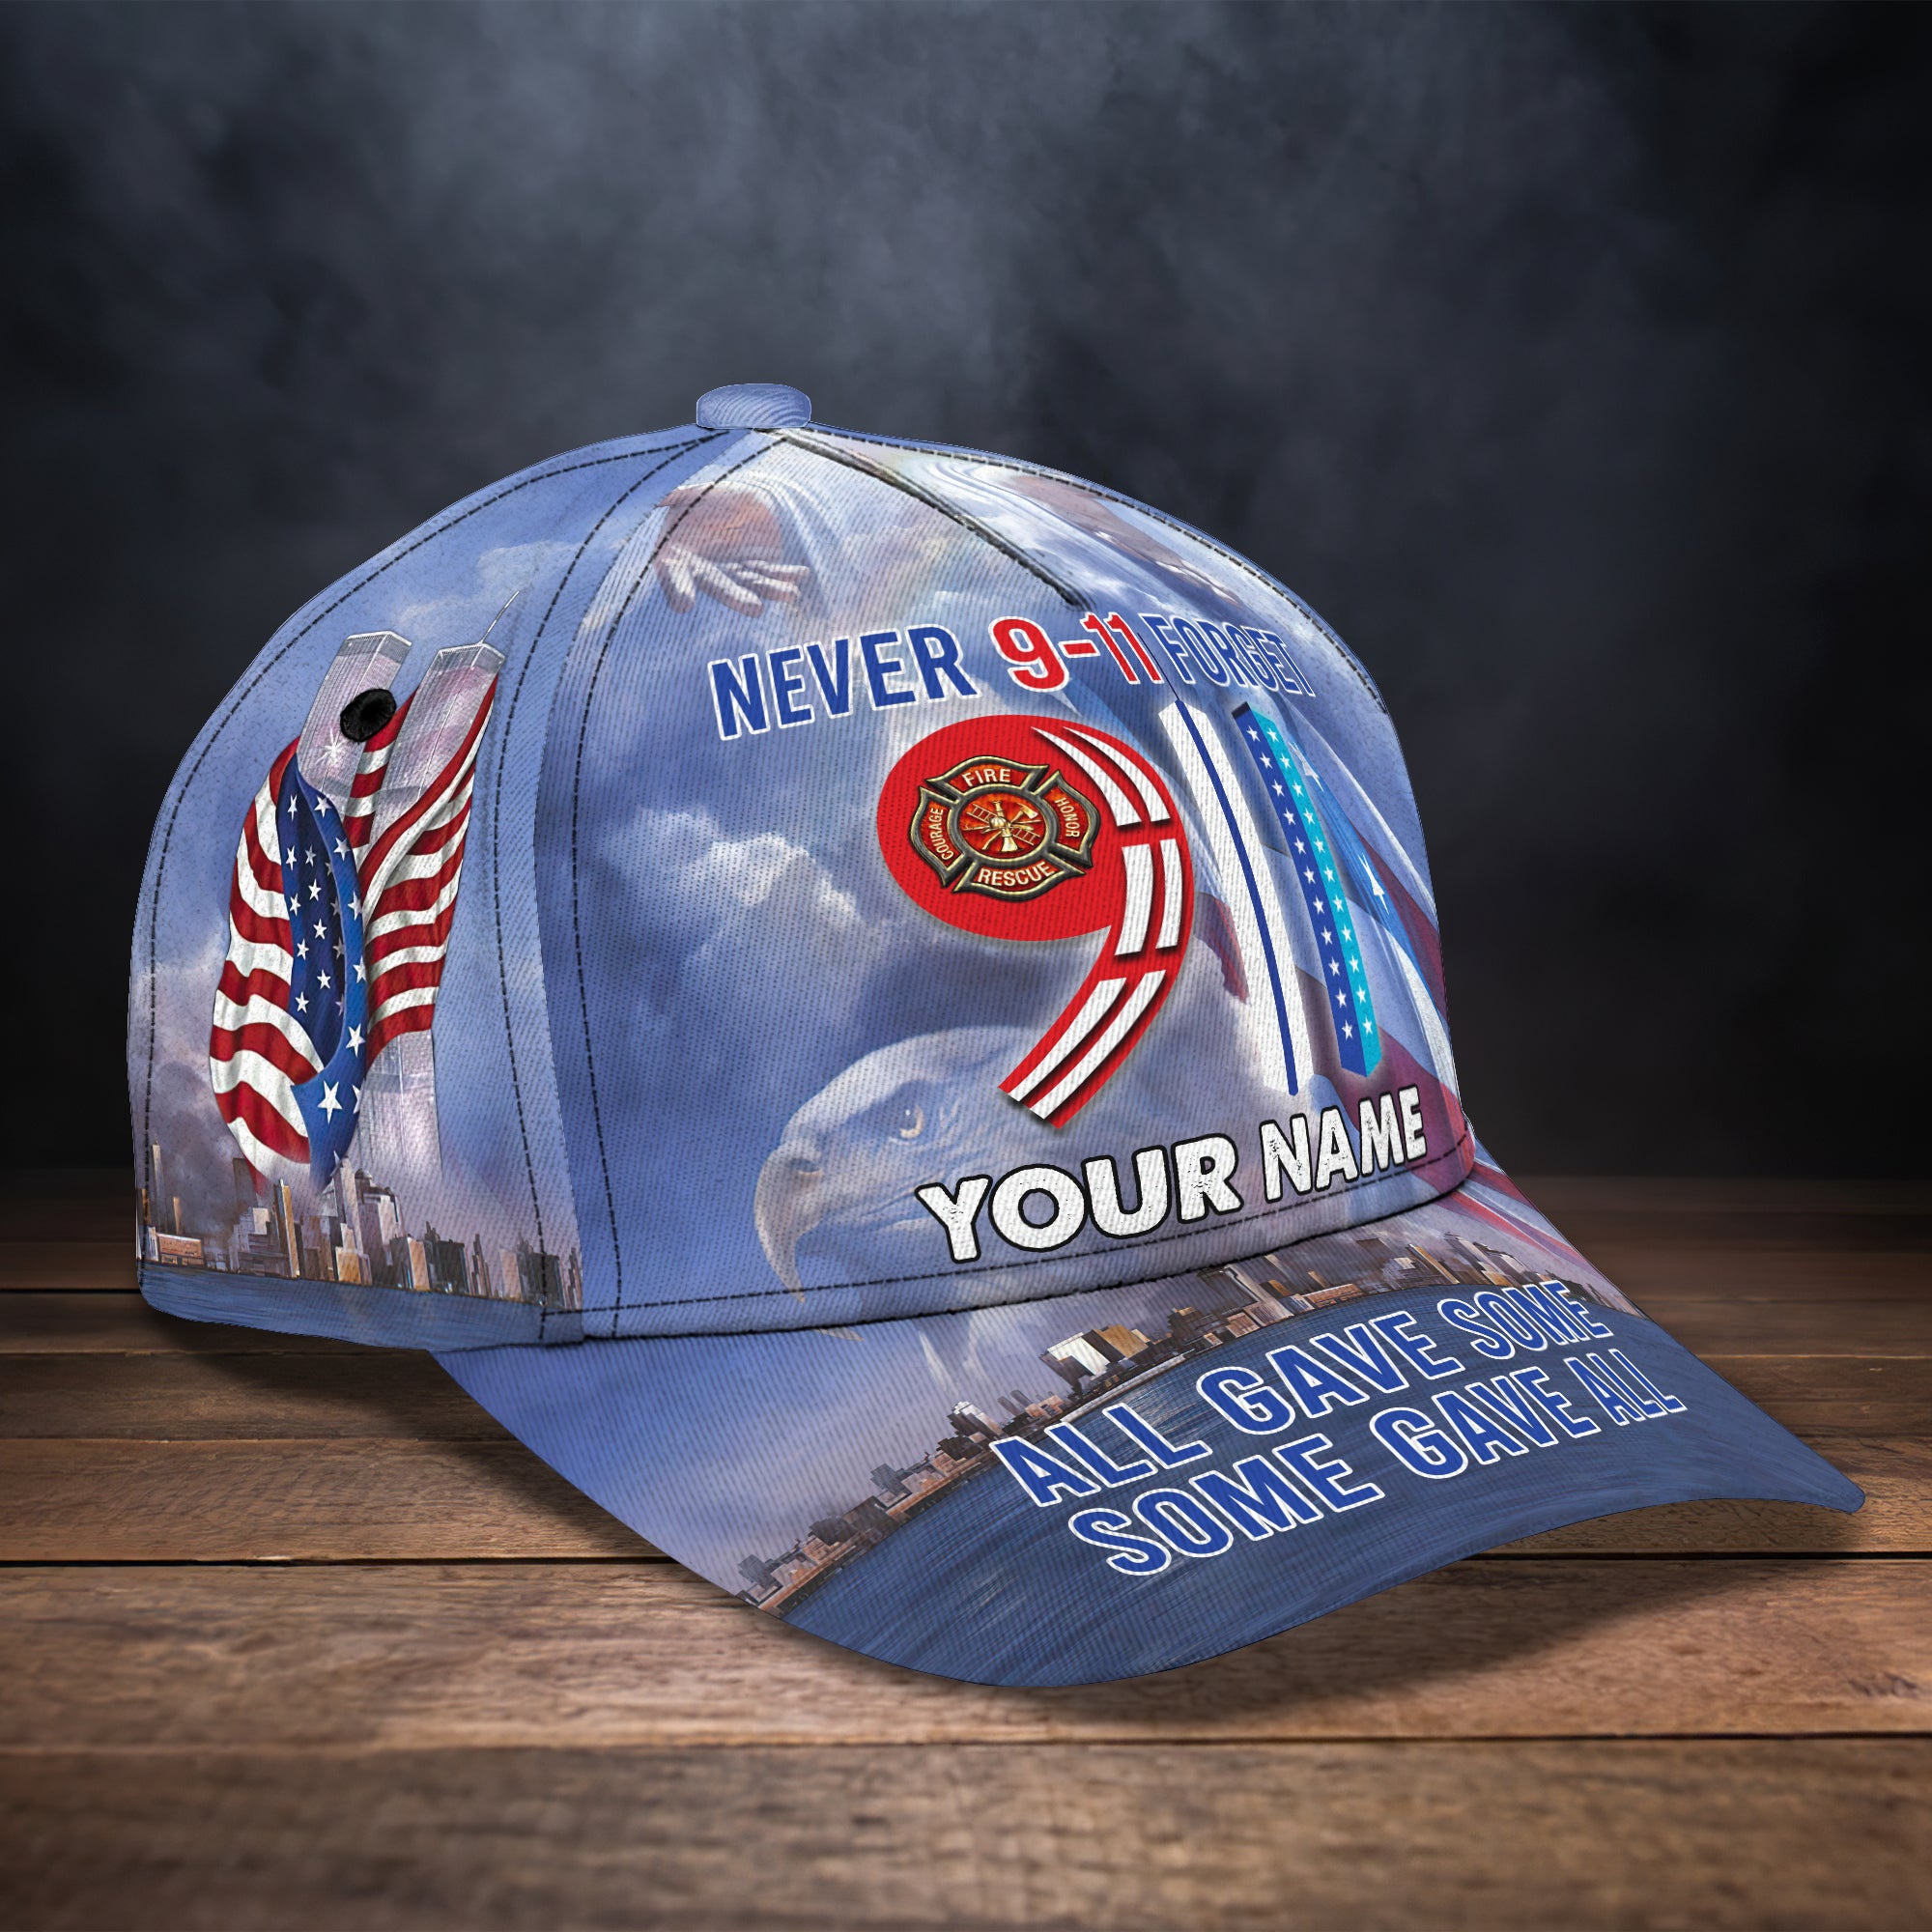 9.11 NEVER FORGET - Personalized Name Cap 01 - CV98